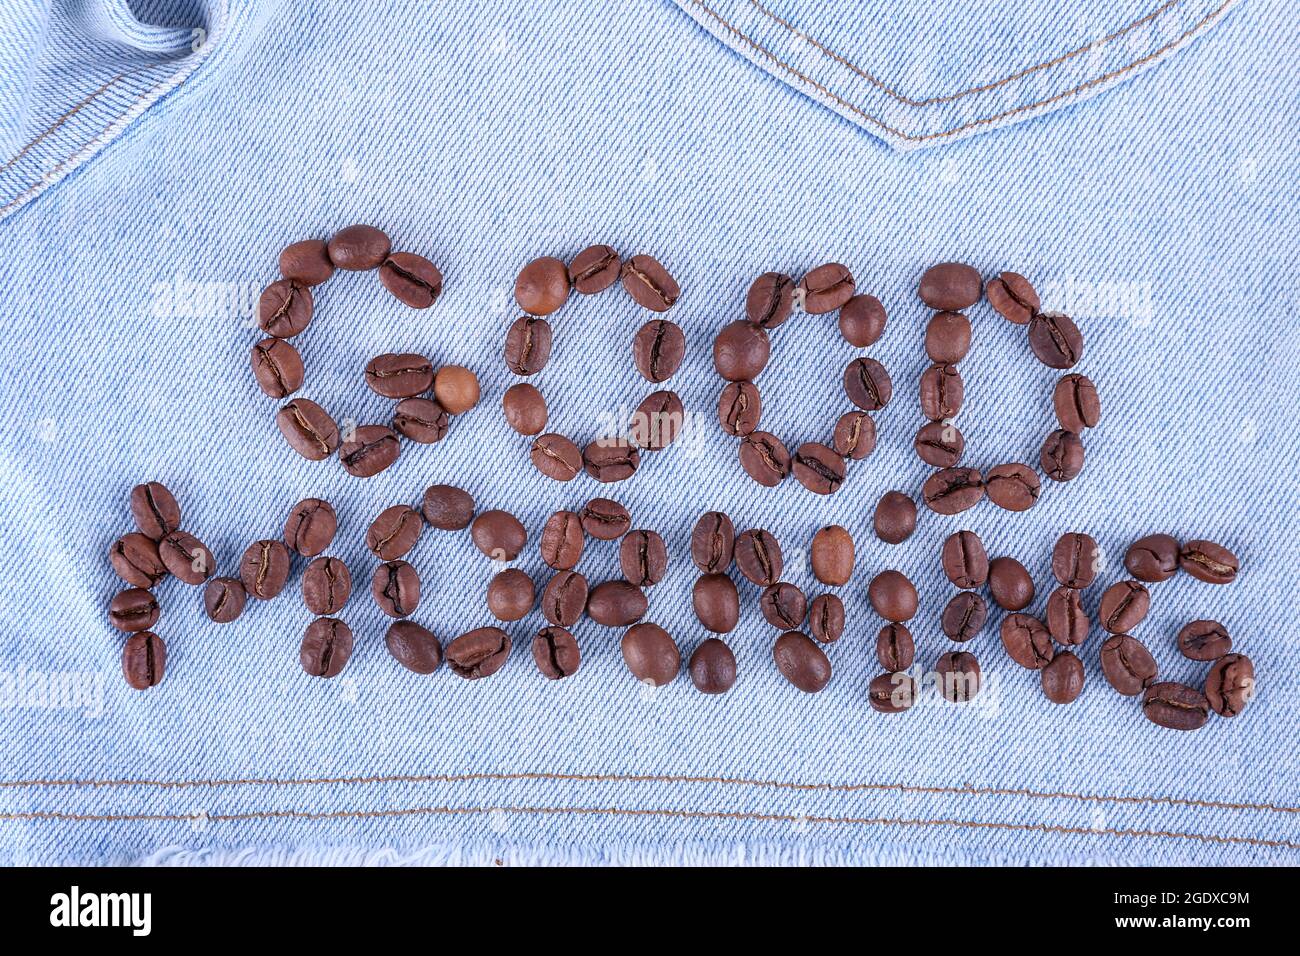 Sign Good Morning made of coffee beans on jeans background Stock Photo -  Alamy